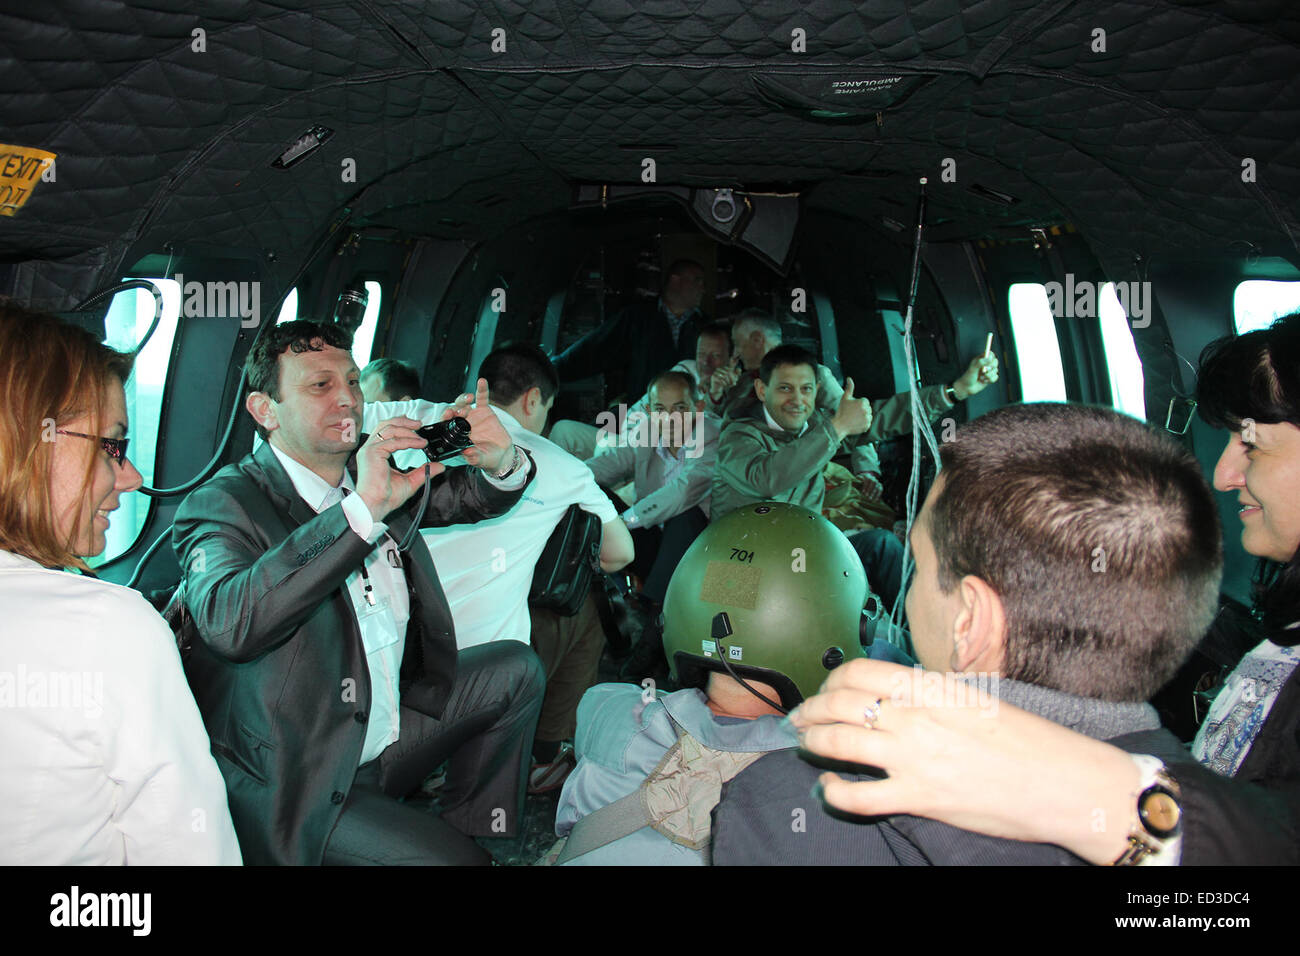 Bulgarian Air Force officers rescue tourists after heavy floods hit the Black Sea resort of Albena, east of the Bulgarian capital Sofia.  Featuring: Atmosphere Where: Albena, Bulgaria When: 22 Jun 2014 Stock Photo